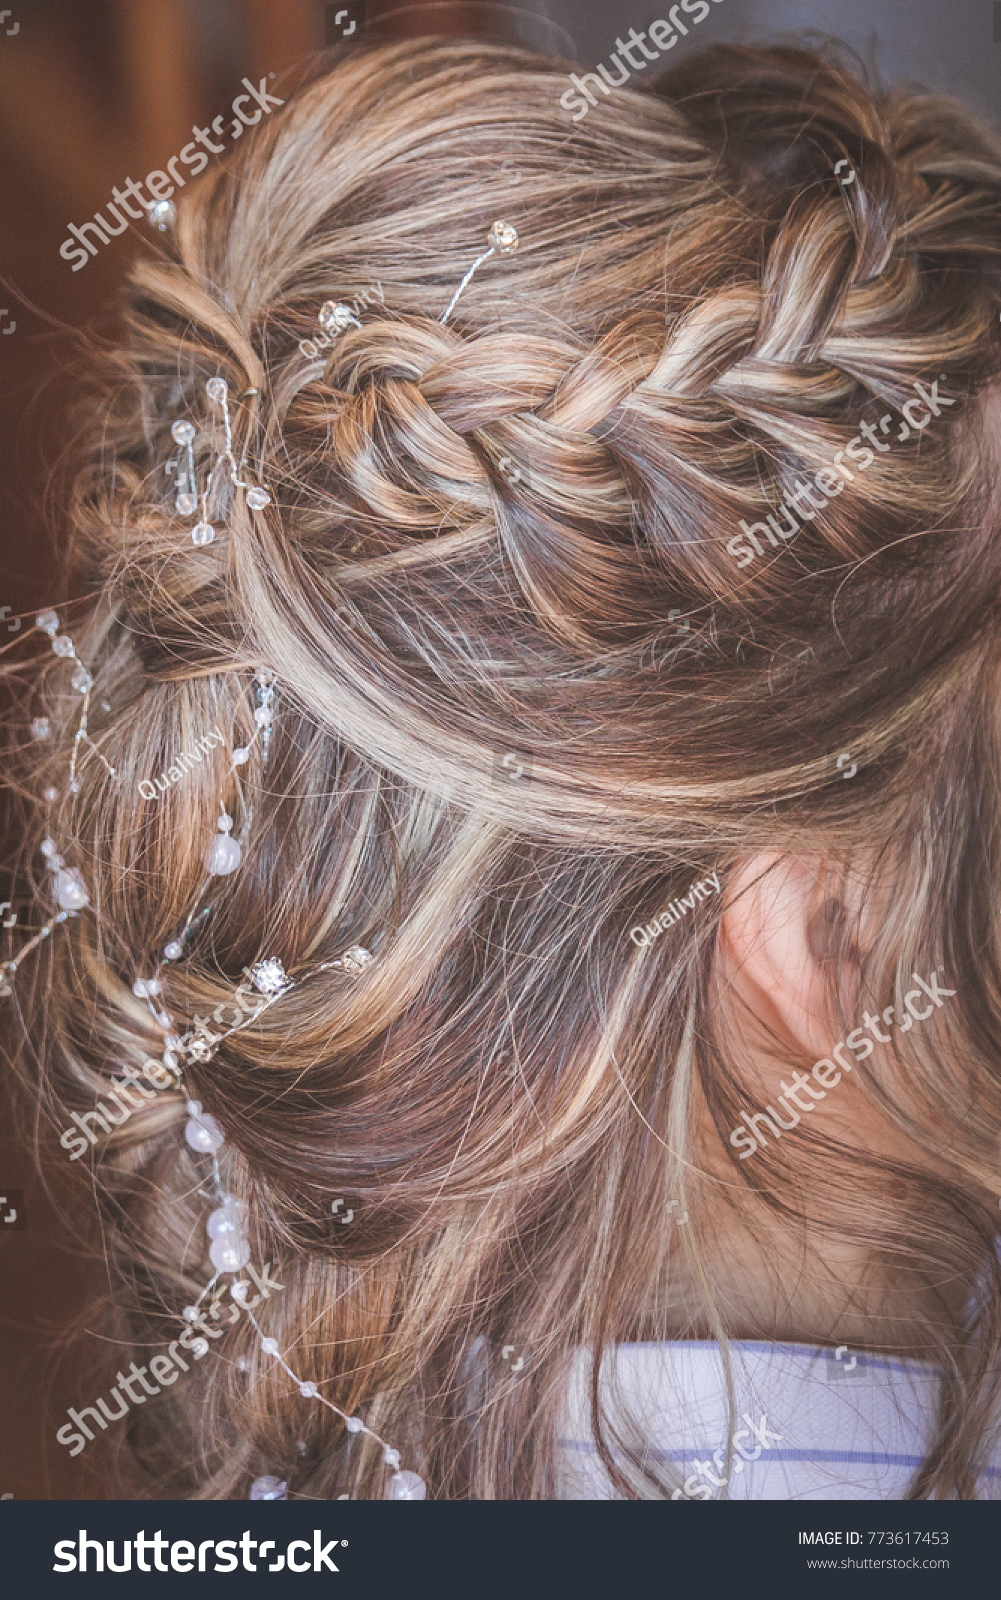 Blonde Woman French Braid Hairstyle Wedding Stock Photo